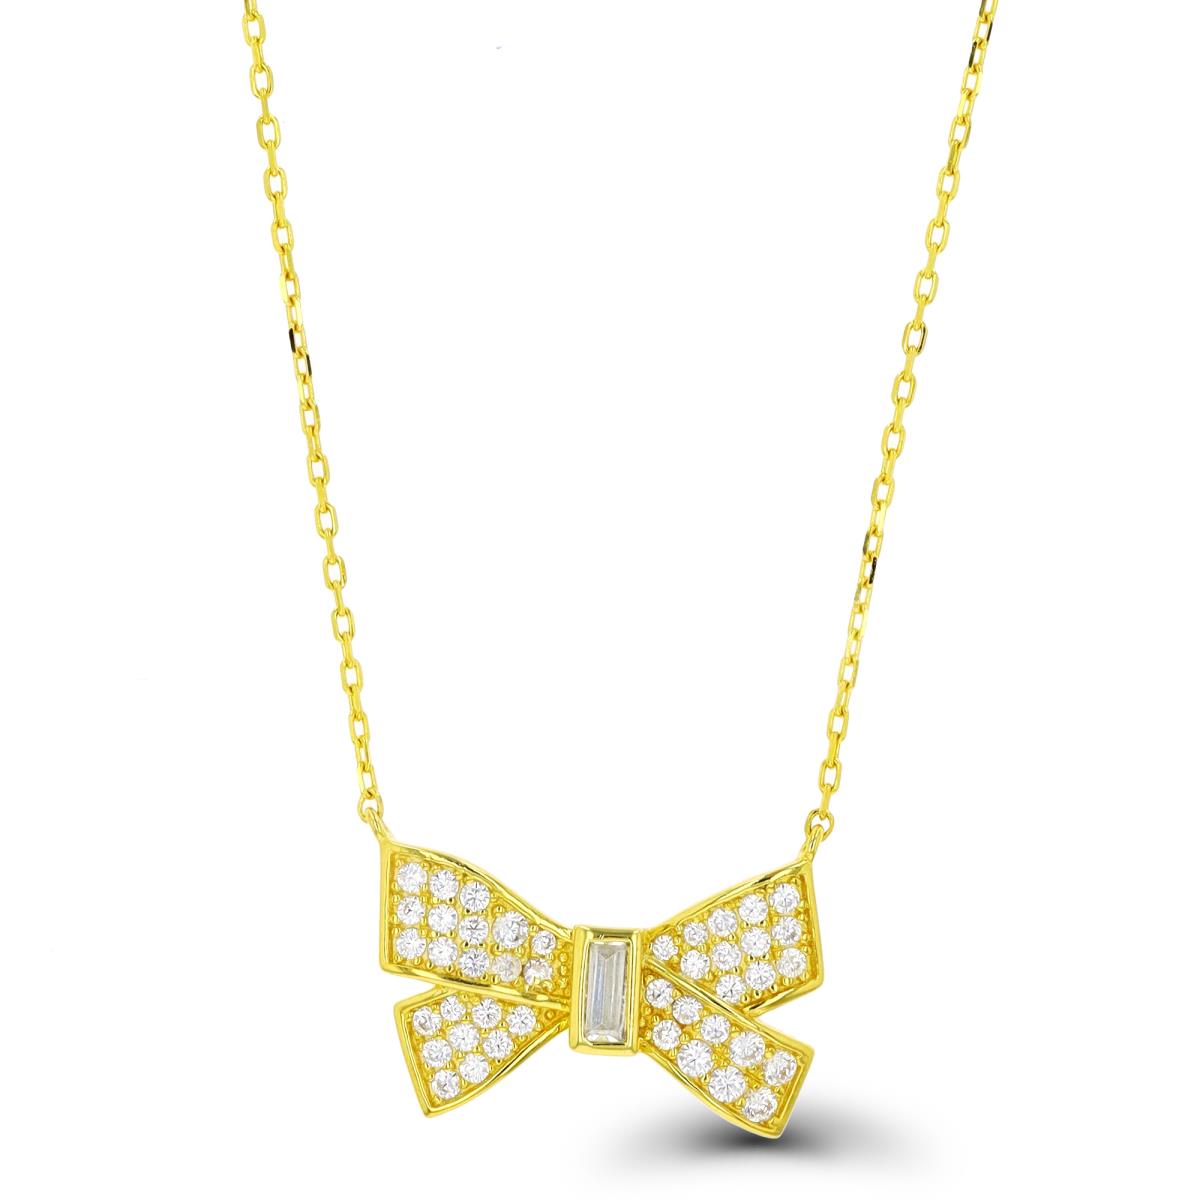 Sterling Silver Yellow Rd & Bgt CZ Bow 16"+2" Necklace